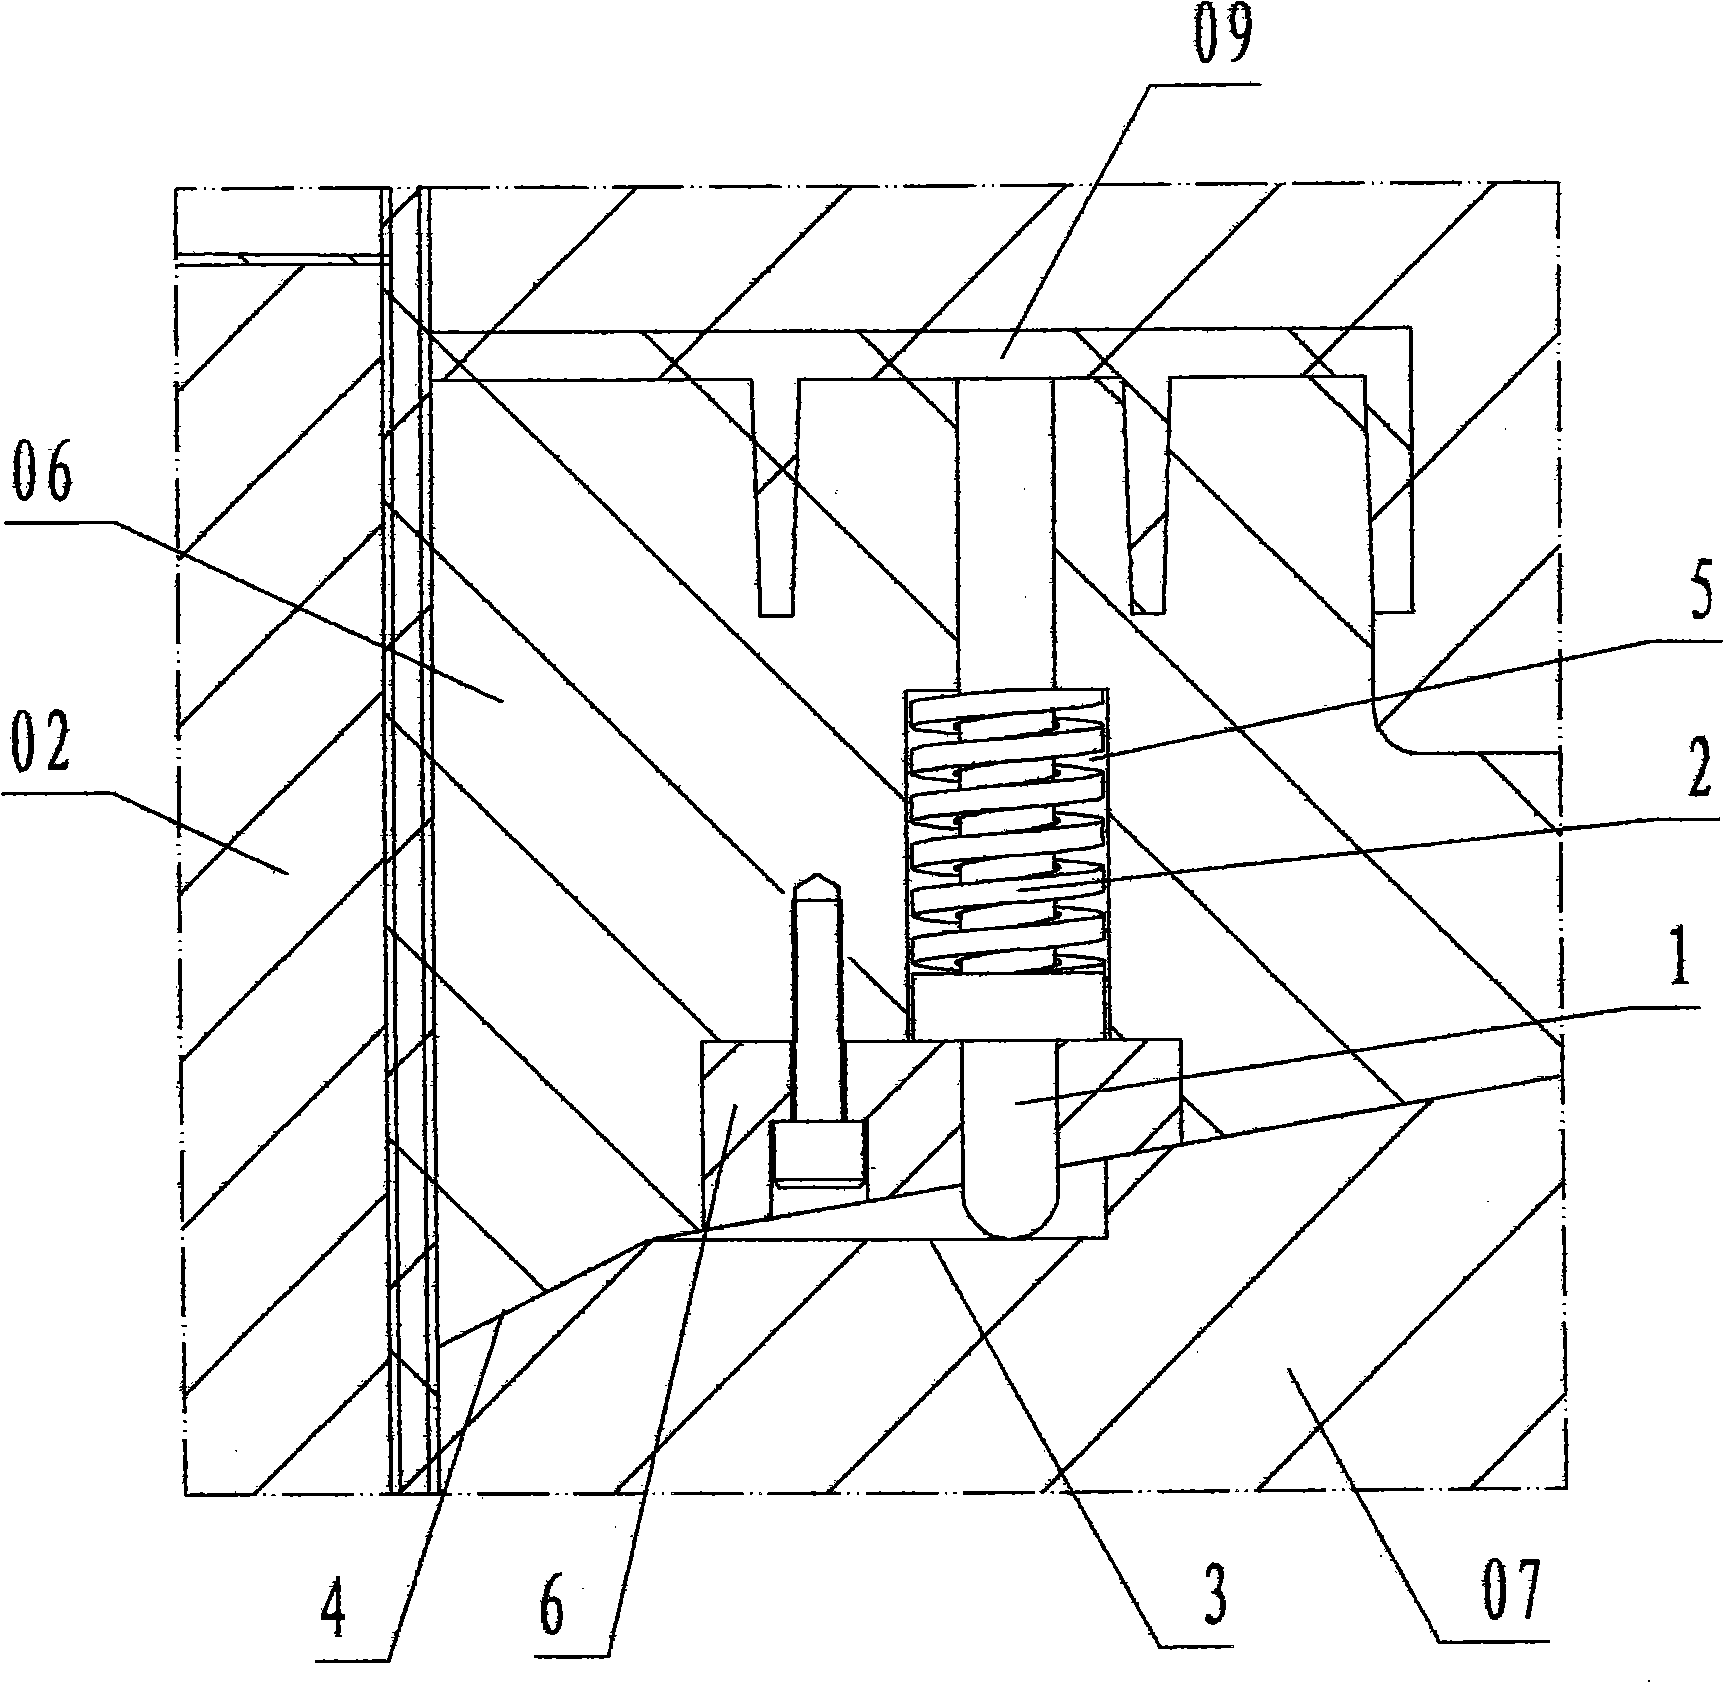 Time-delay drawing protection technical apparatus for injection mold slide block thimble and inclined jacking block thimble